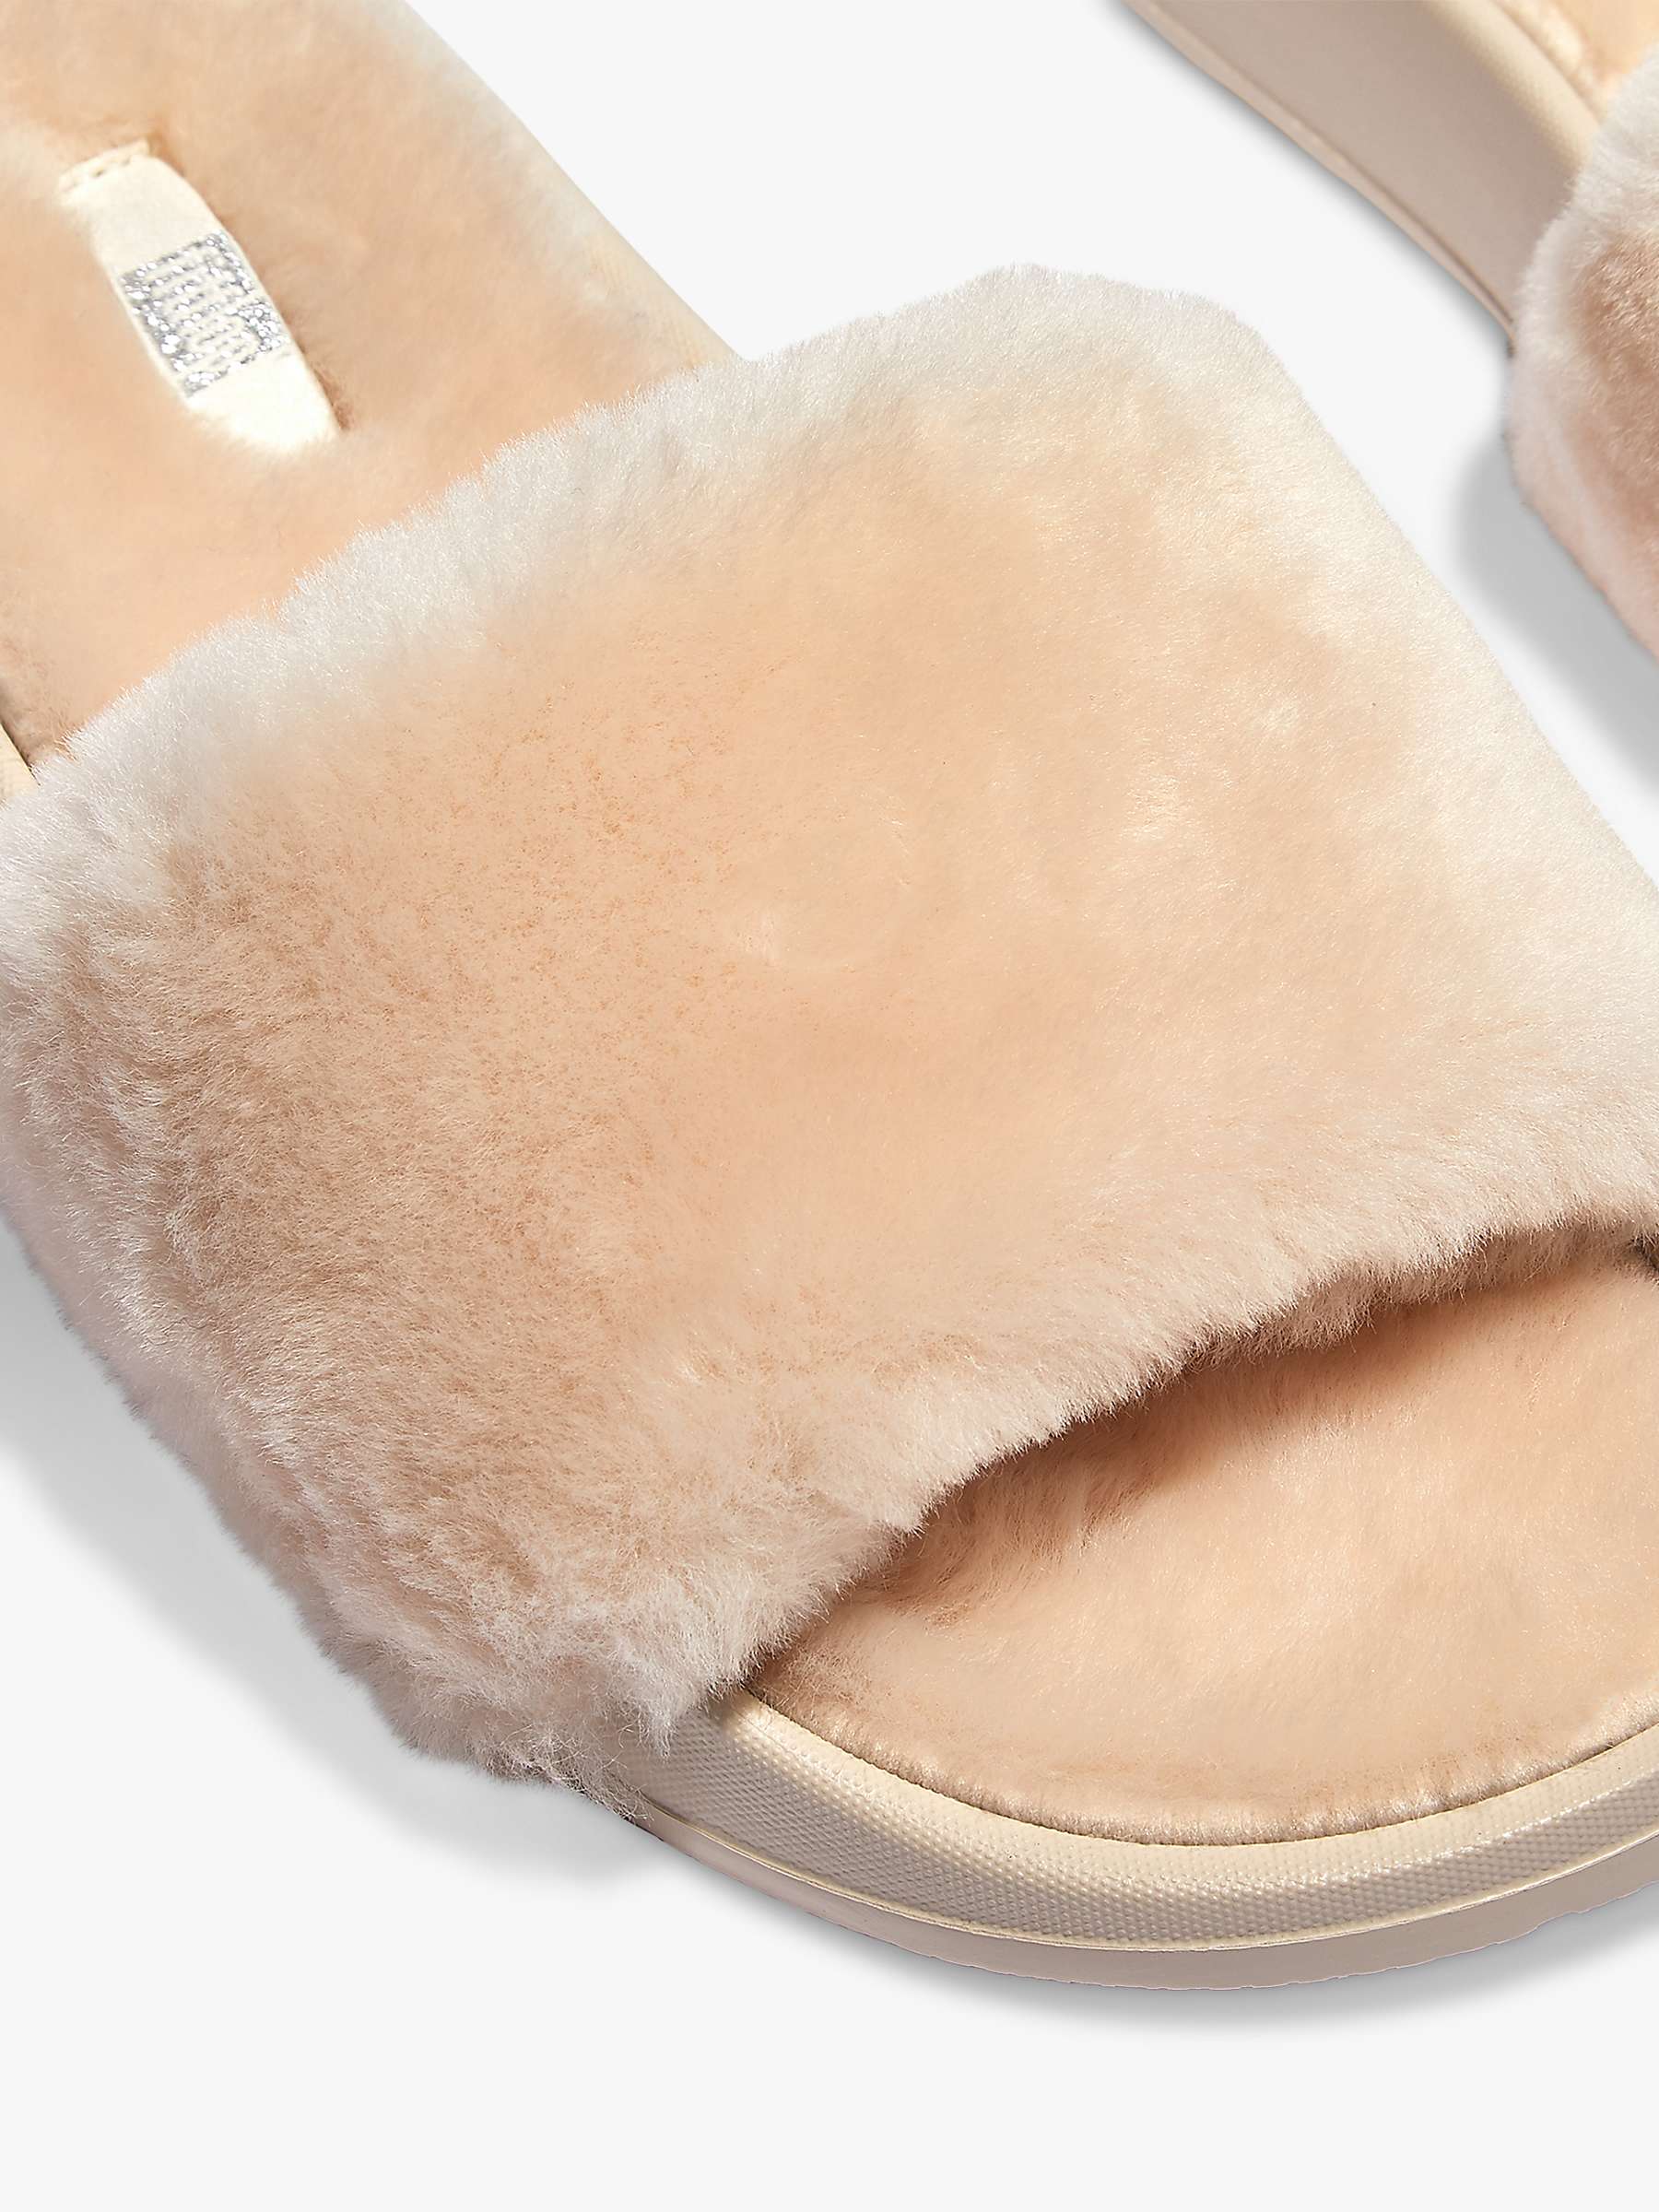 Buy FitFlop IQushion Shearling Sliders Online at johnlewis.com